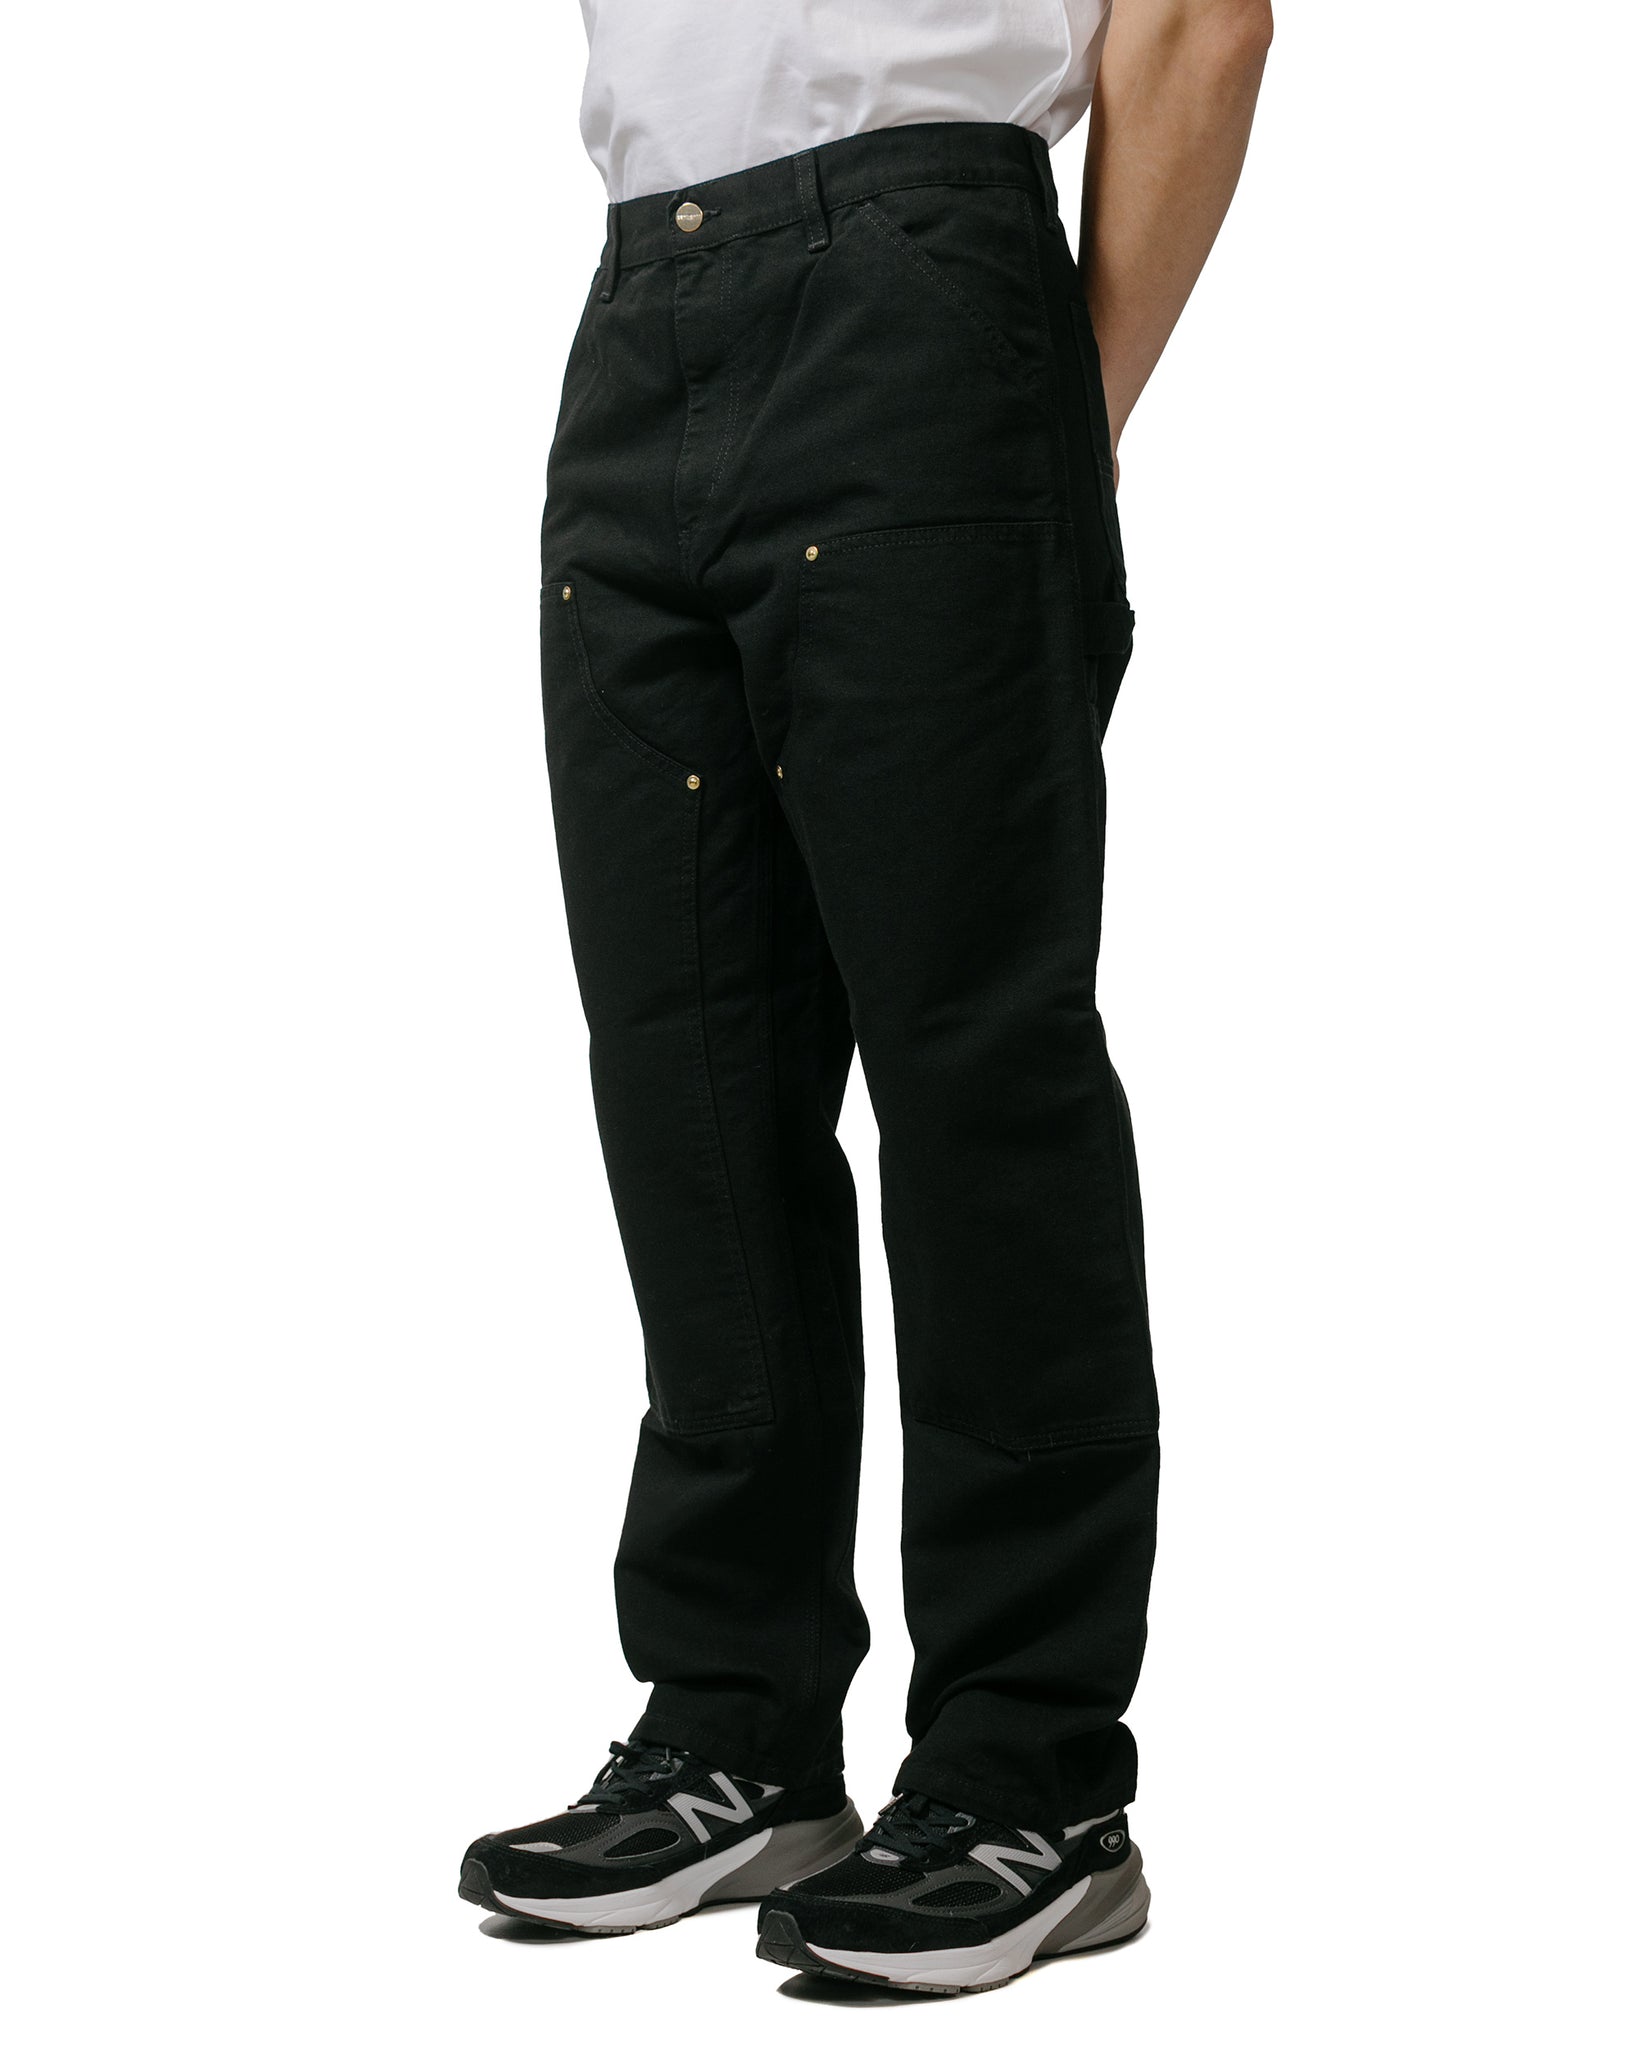 Carhartt W.I.P. Double Knee Pant Canvas Black Rinsed model front